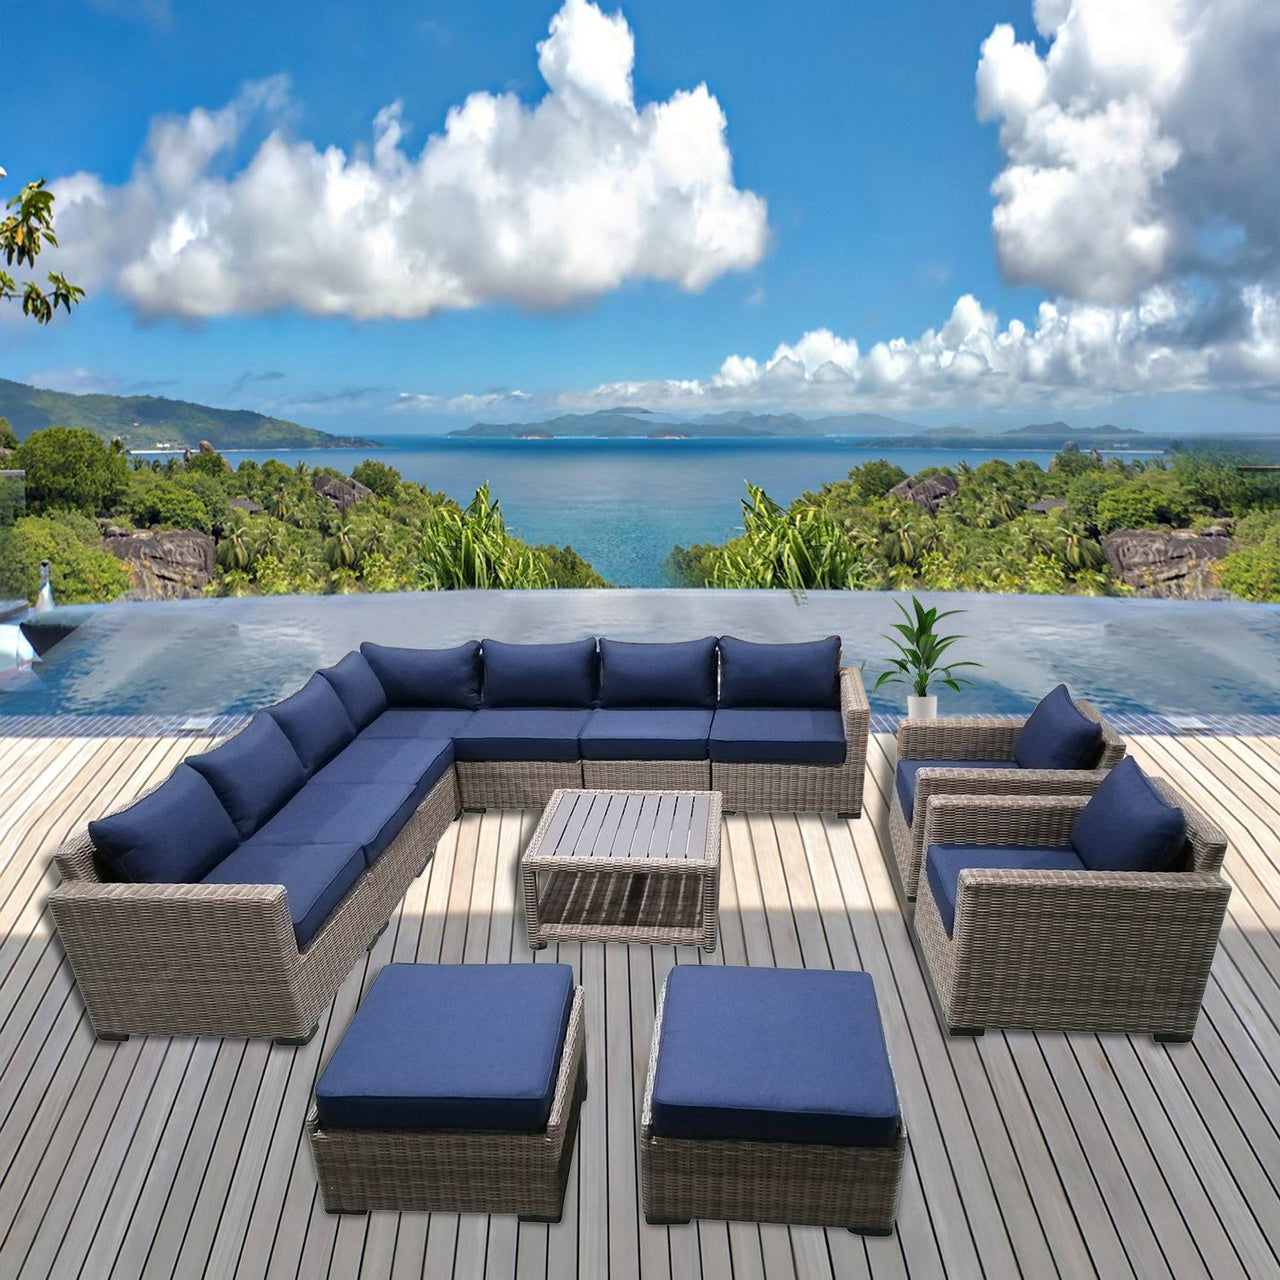 12-Piece Outdoor Pation Funiture Set Wicker Rattan Sectional Sofa Couch with Coffee Table Outdoor Furniture Casual Inc. 